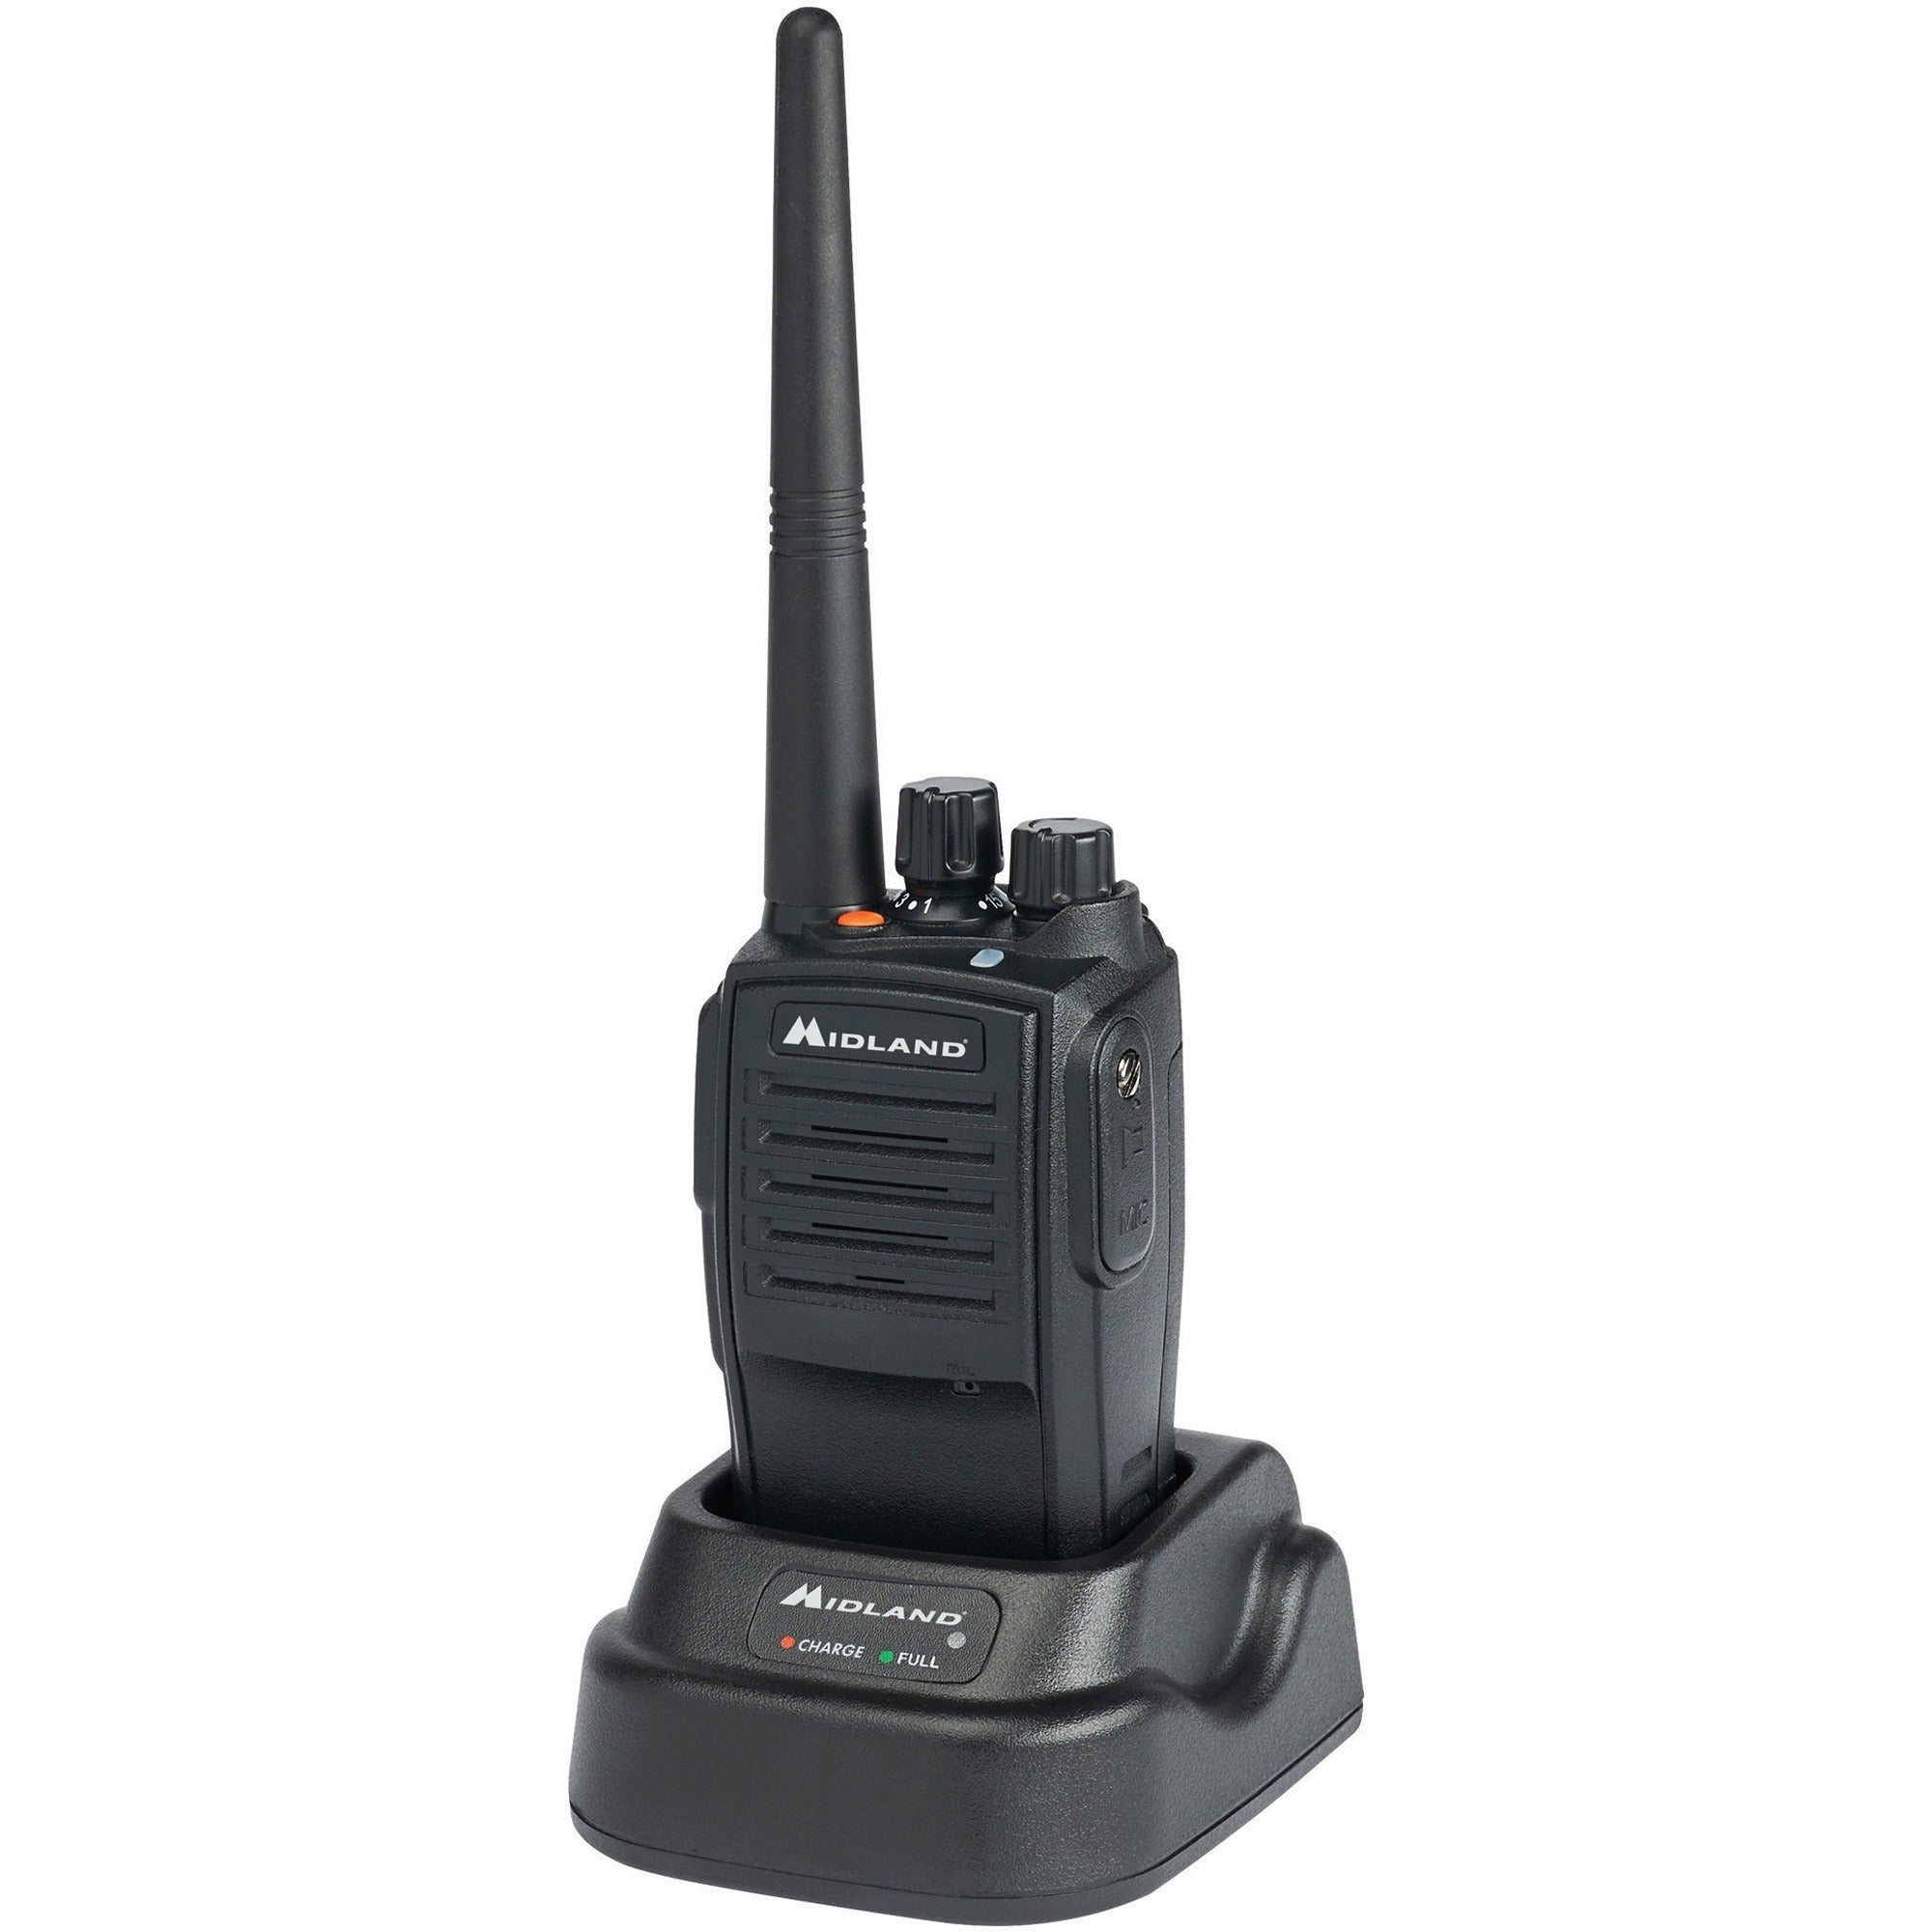 midland-mb400-business-radio-16-radio-channels-142-total-privacy-codes-4-w-low-battery-indicator-timer-lightweight-water-proof-dust-proof-lithium-ion-li-ion-black-1-each_mromb400 - 1